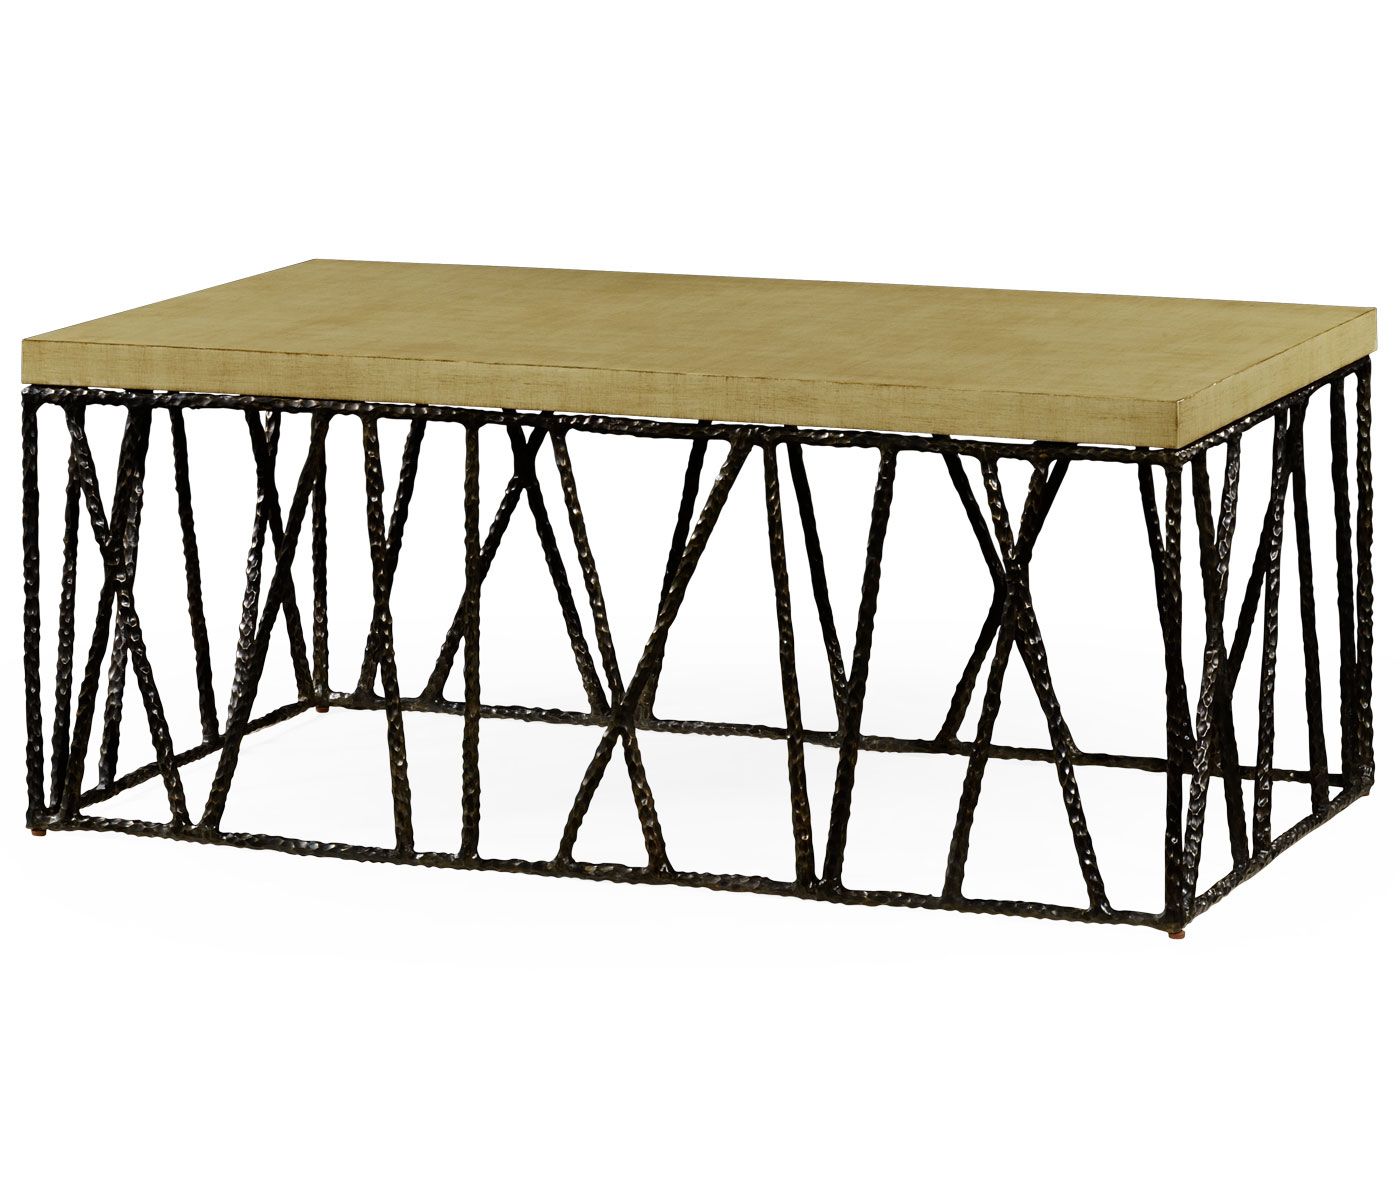 Hammered Antique Brass Modern Cocktail Tables In Most Recently Released Hammered Antique Black Brass Coffee Table With Celadon Top (View 5 of 20)